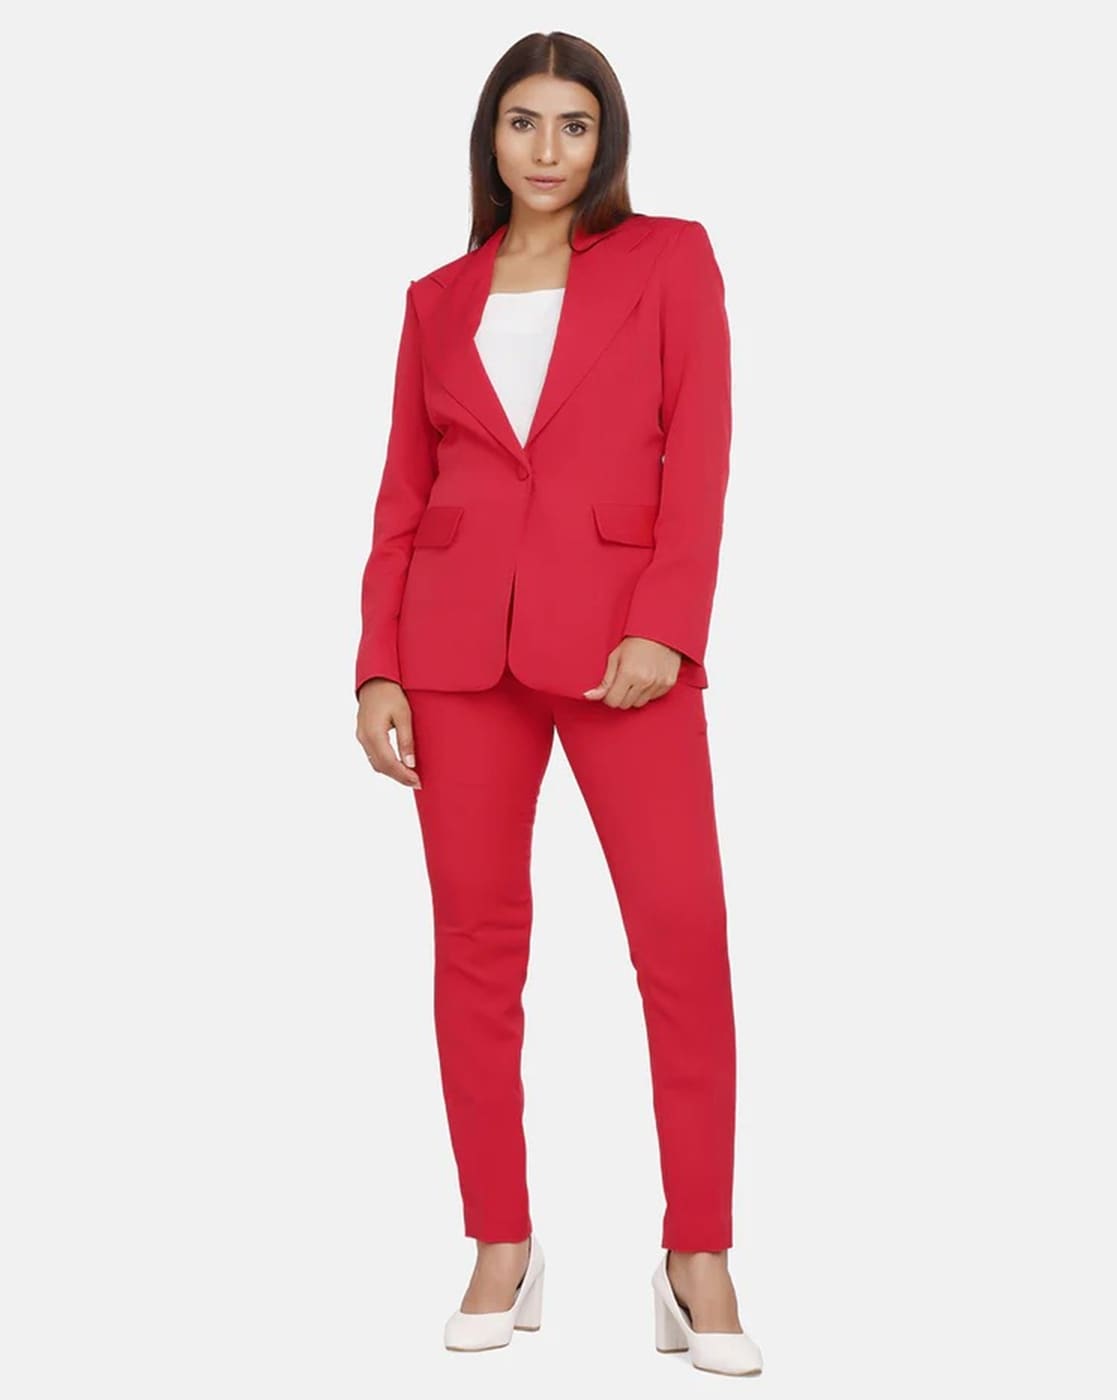 red suit womens